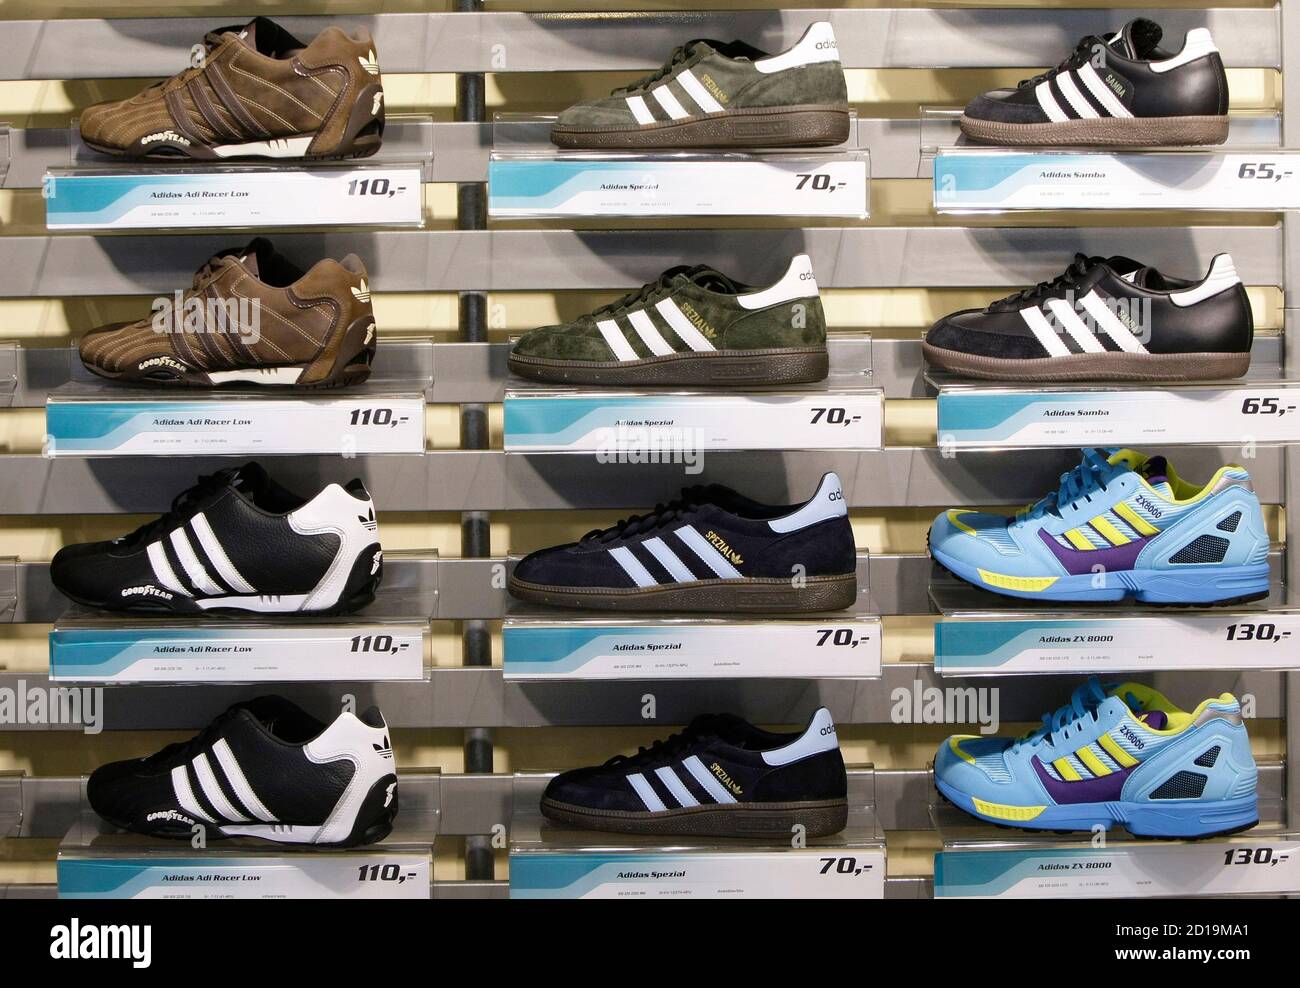 Shoes of Adidas fashion line are pictured in a shoe shop March 3, 2010. Adidas, the world's number two sports goods maker, expects to grow faster this year in North